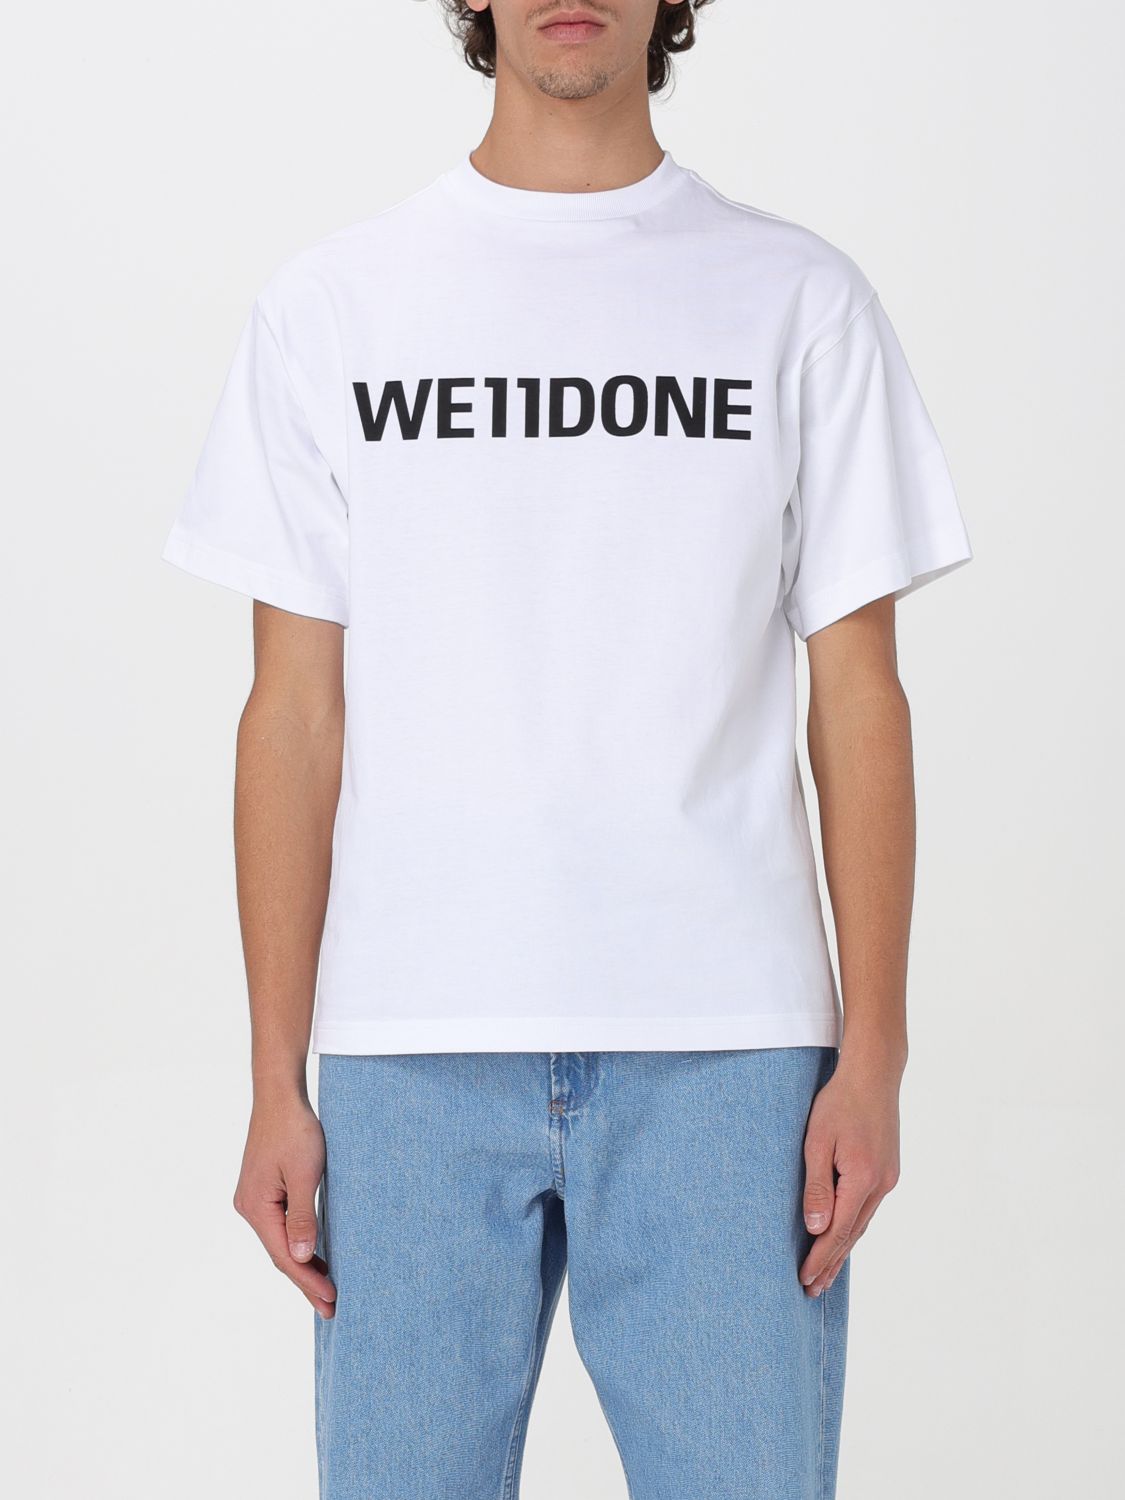 We11done T-Shirt WE11DONE Men color White